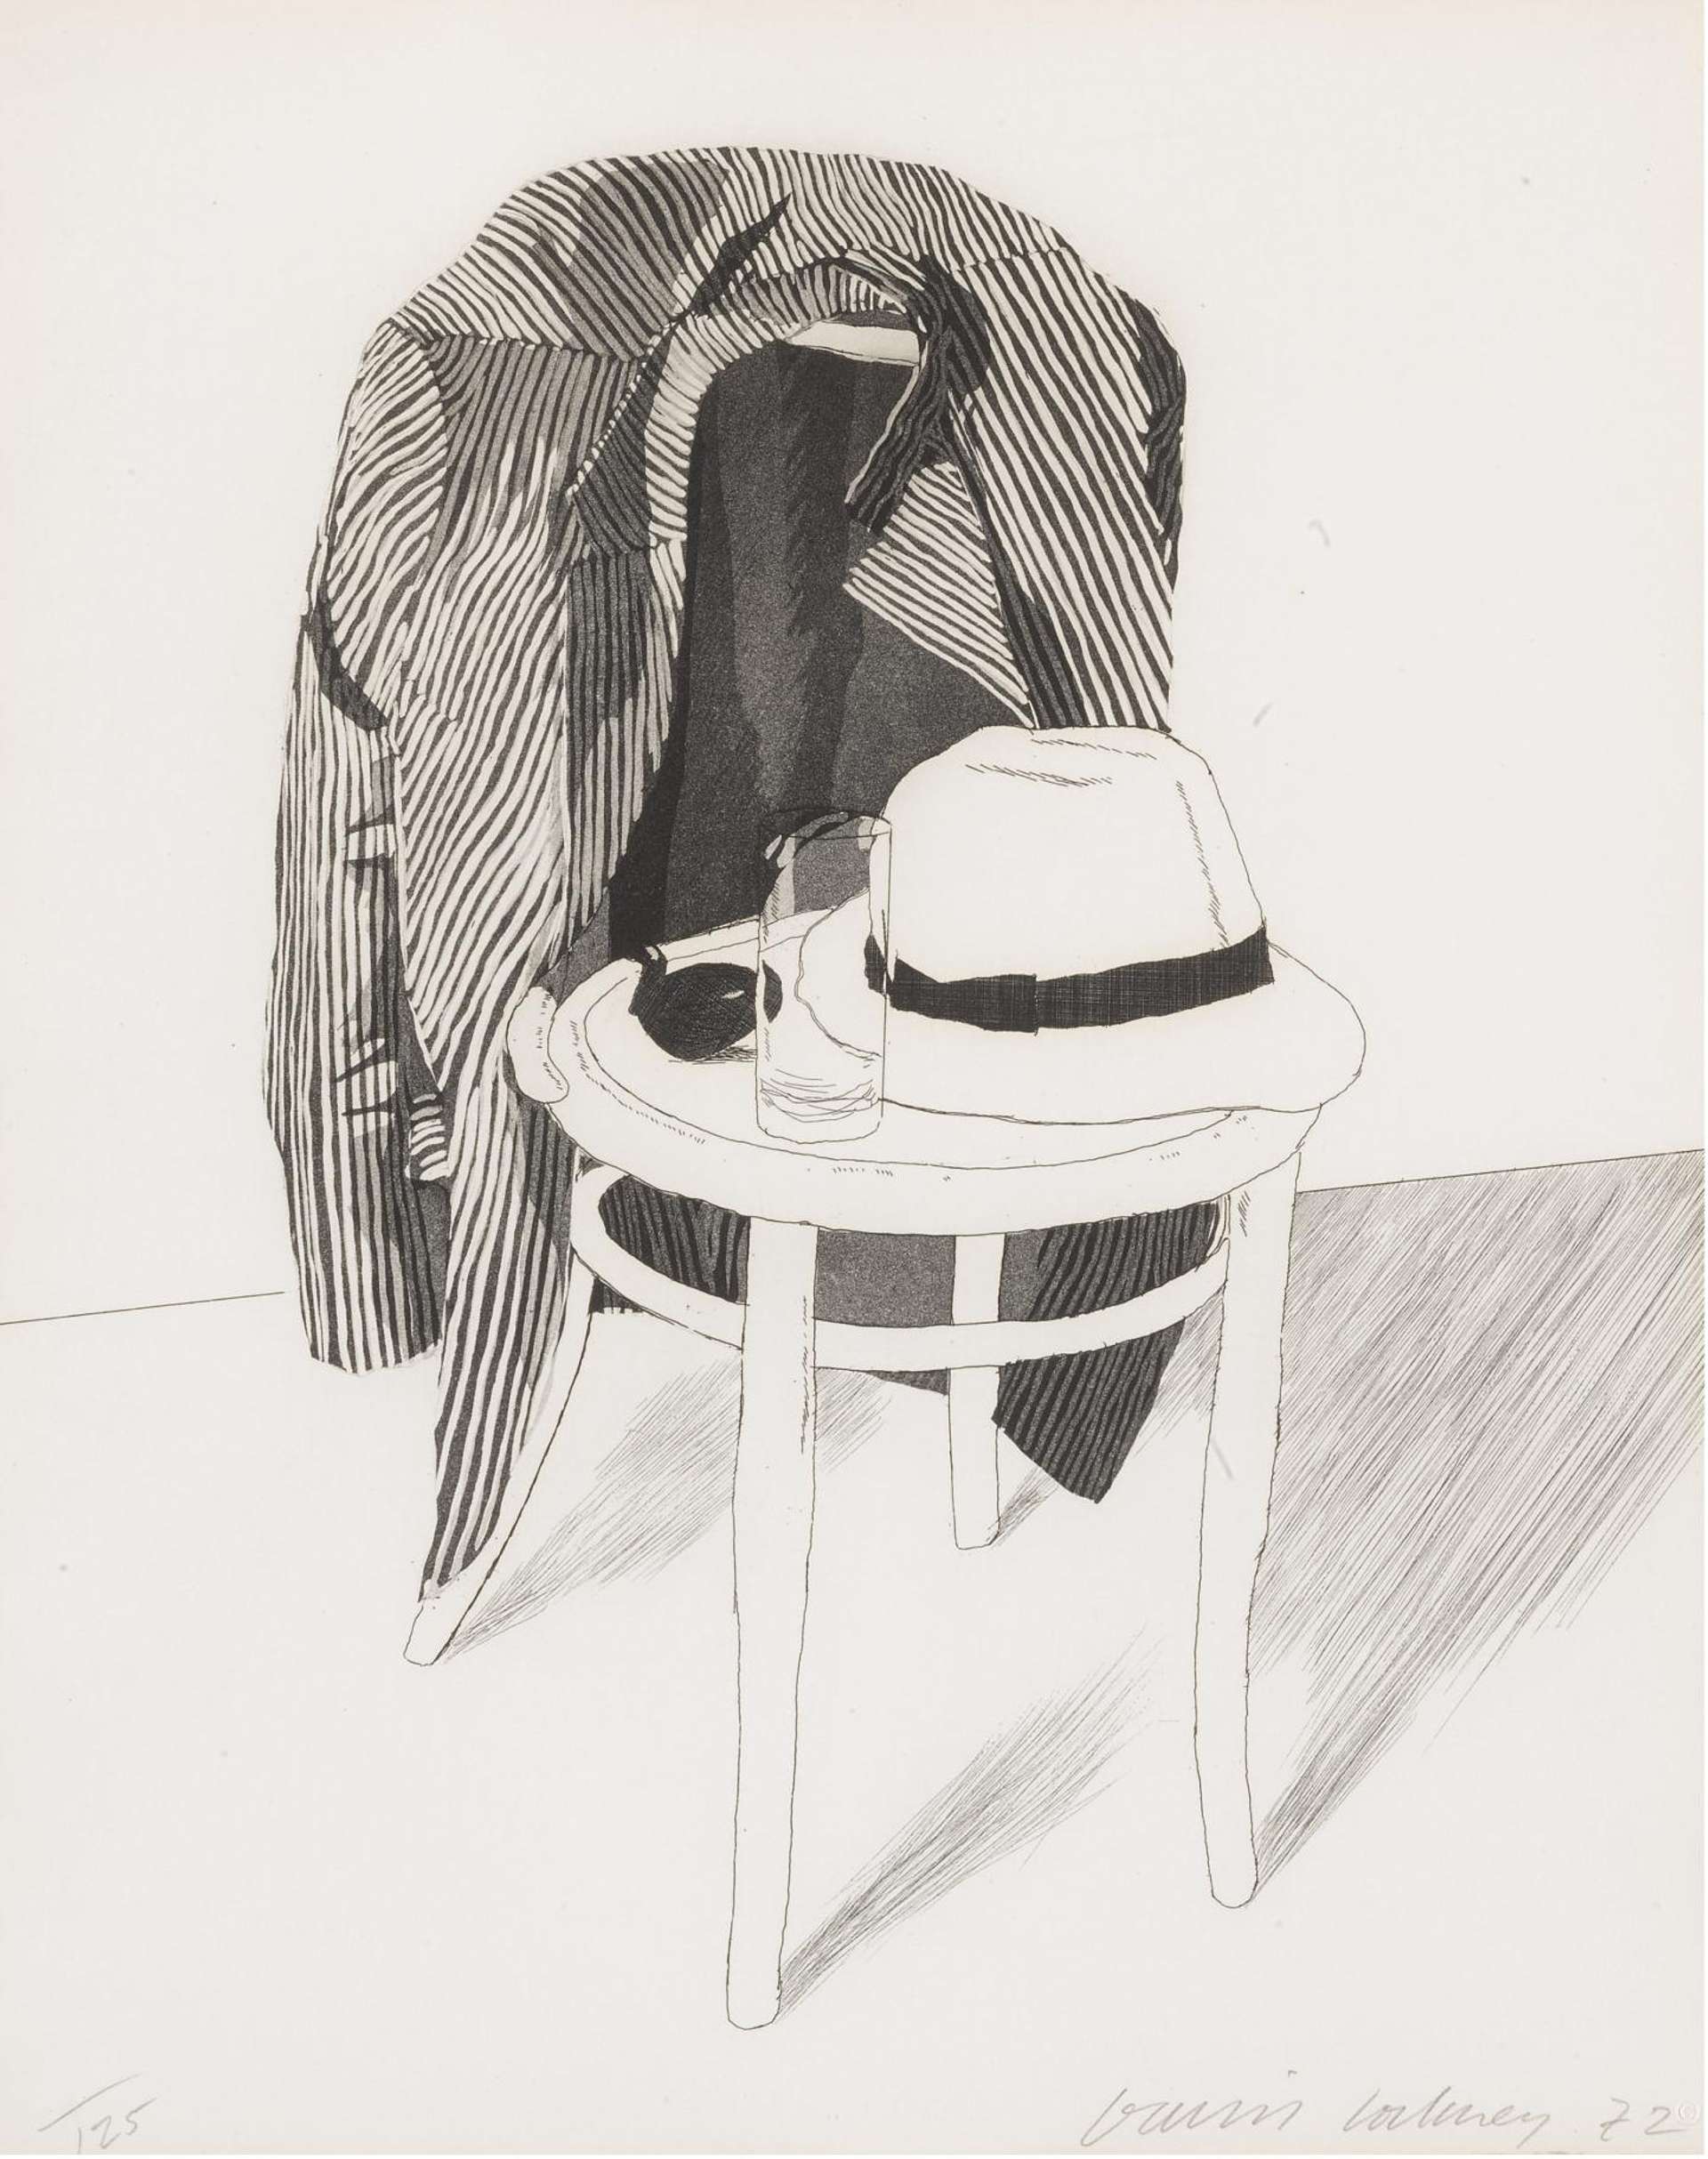 Despite the absence of any figure from this print, it remains full of life; through the representation of Geldzahler’s possessions – a jacket, a panama hat, an empty glass, and a pipe, all sat atop the ghostly suggestion of one of Hockney’s signature chairs – absence comes to suggest presence.